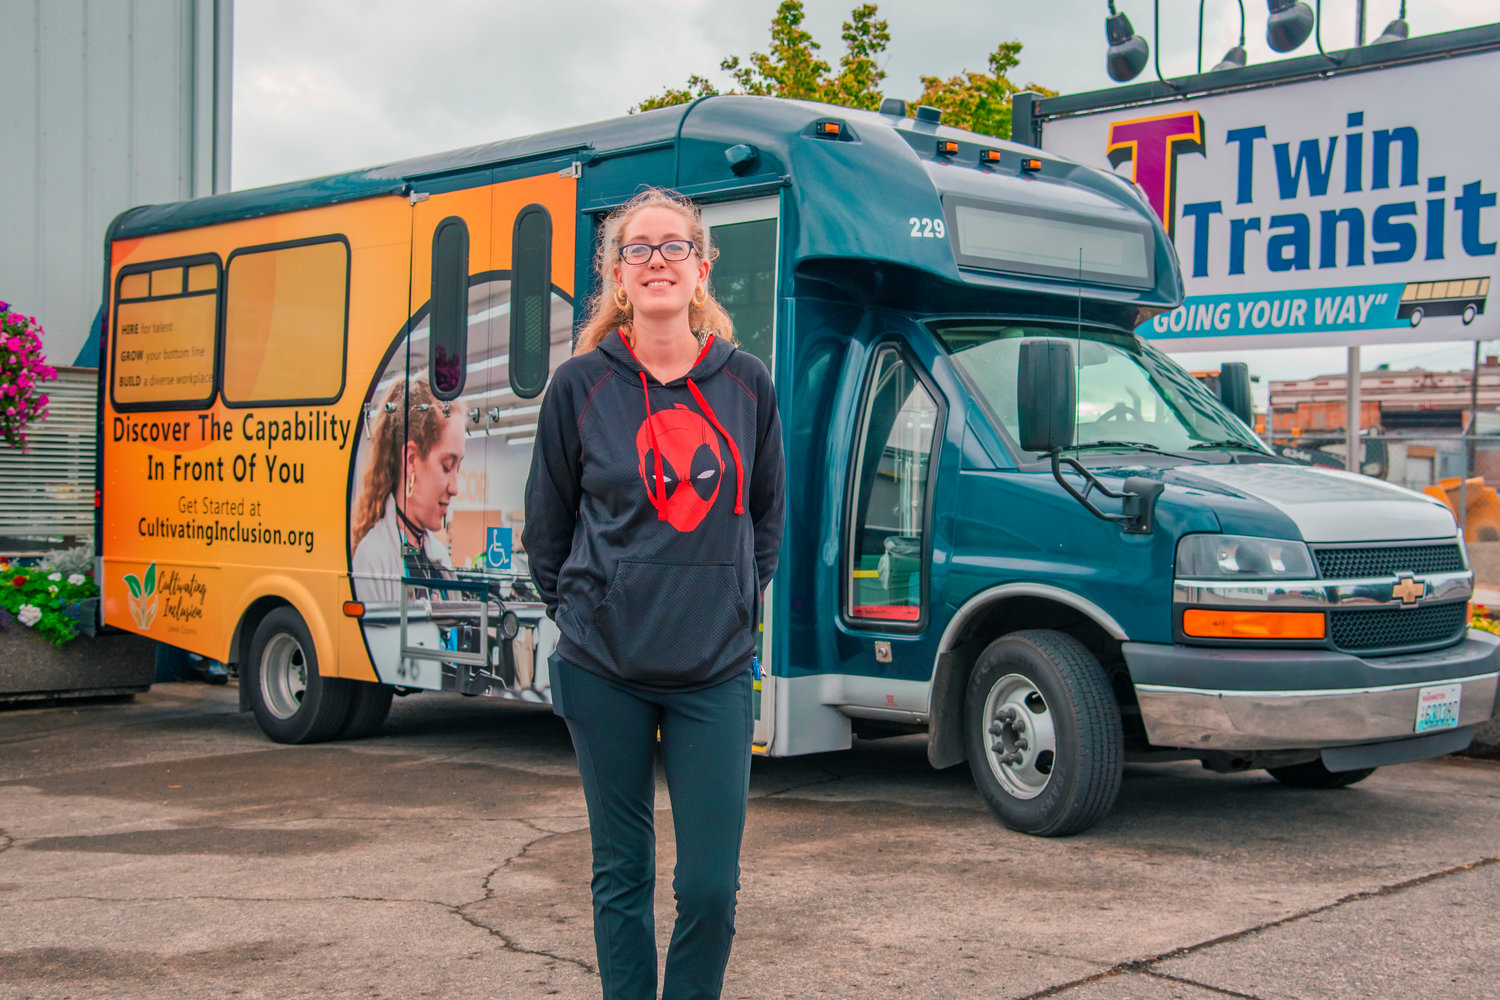 Hannah Byrd smiles and poses for a photo in front of newly wrapped Twin Transit ride featuring a photo of her working locally at Goodwill Thursday in Centralia during a Cultivating Inclusion job hiring campaign.